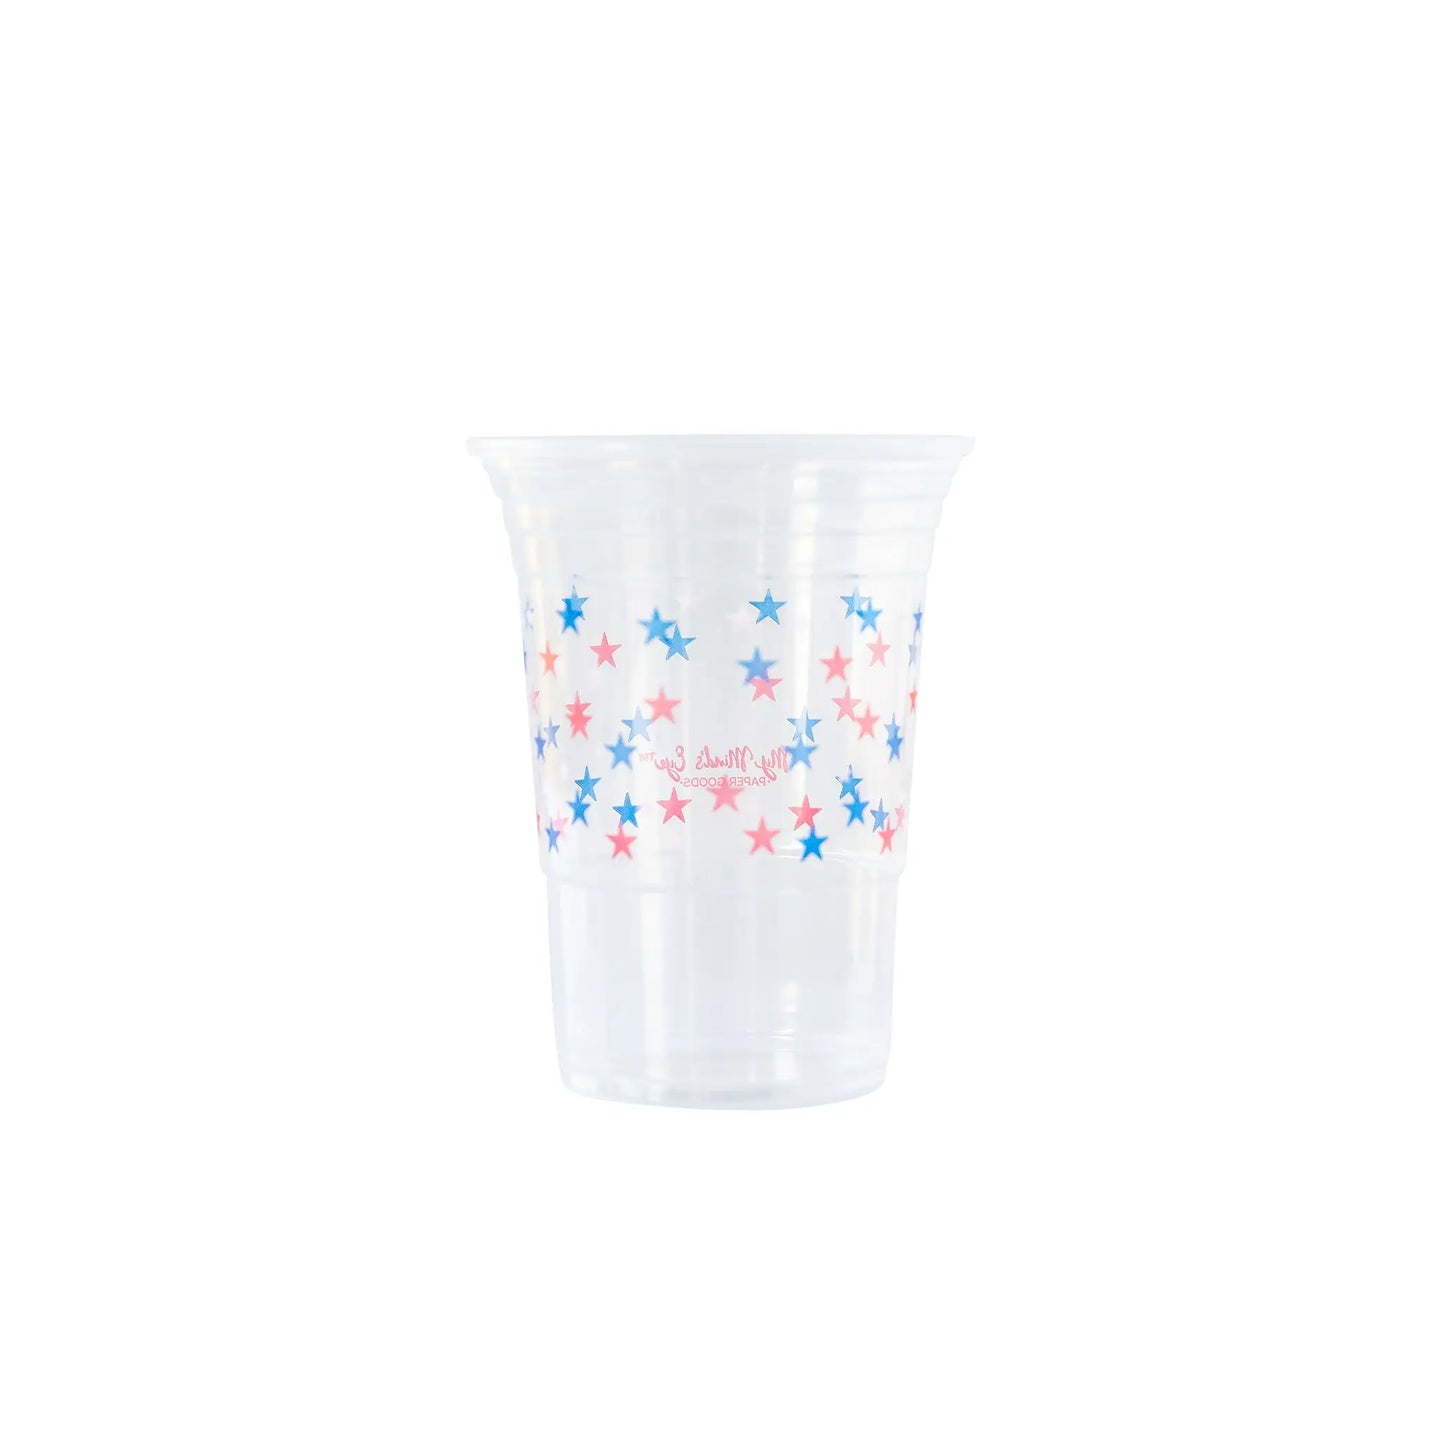 Lots of Stars Plastic Party Cups